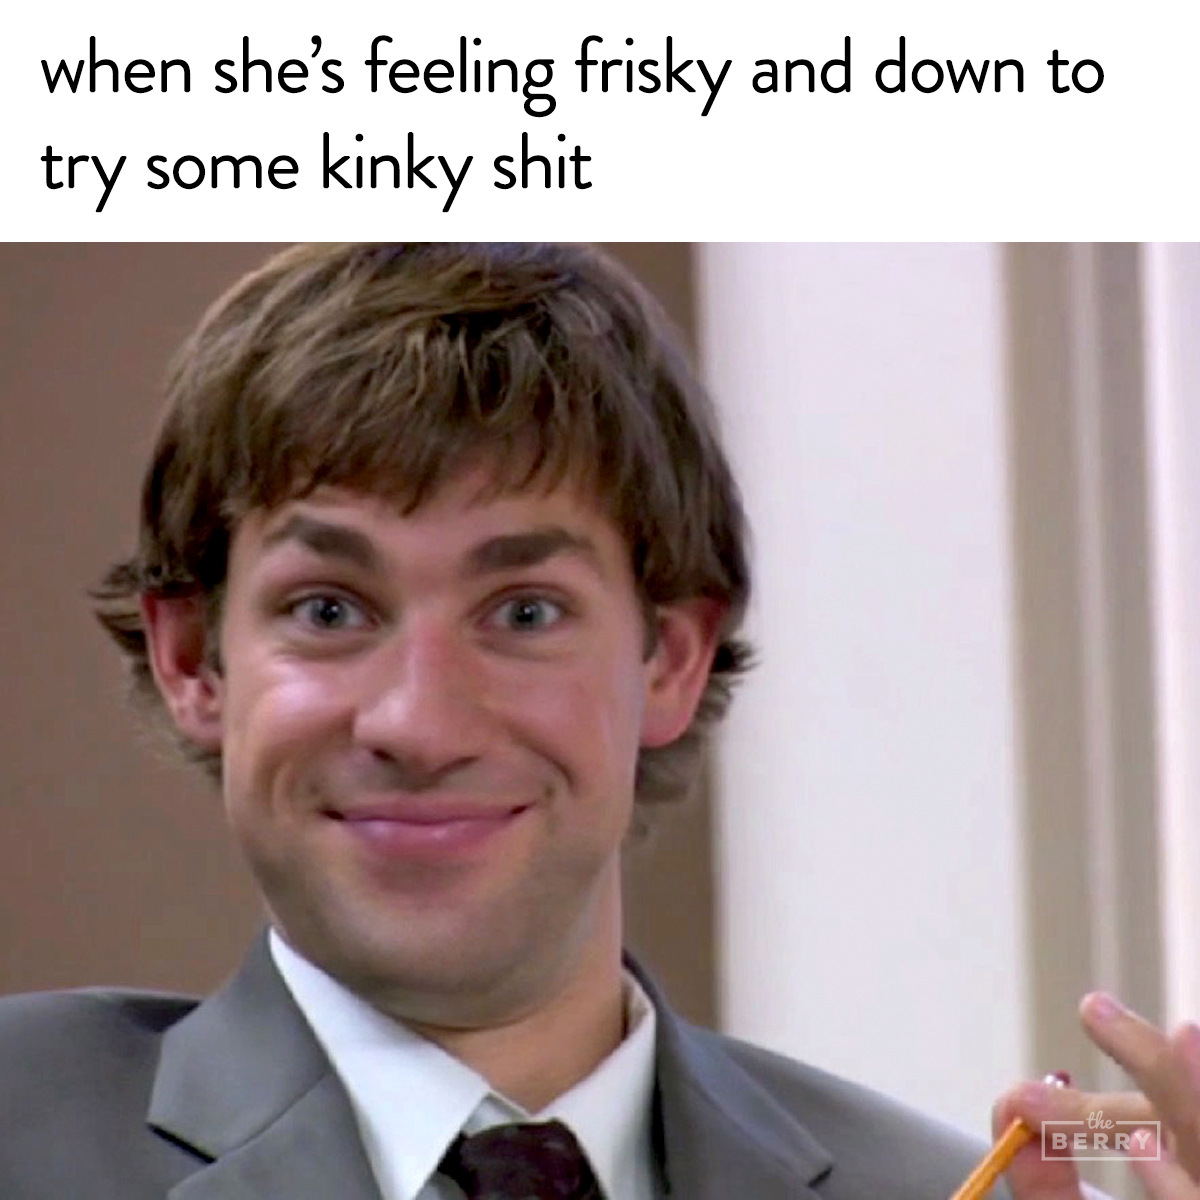 22 Times The Office Summed Up Your Sex Life